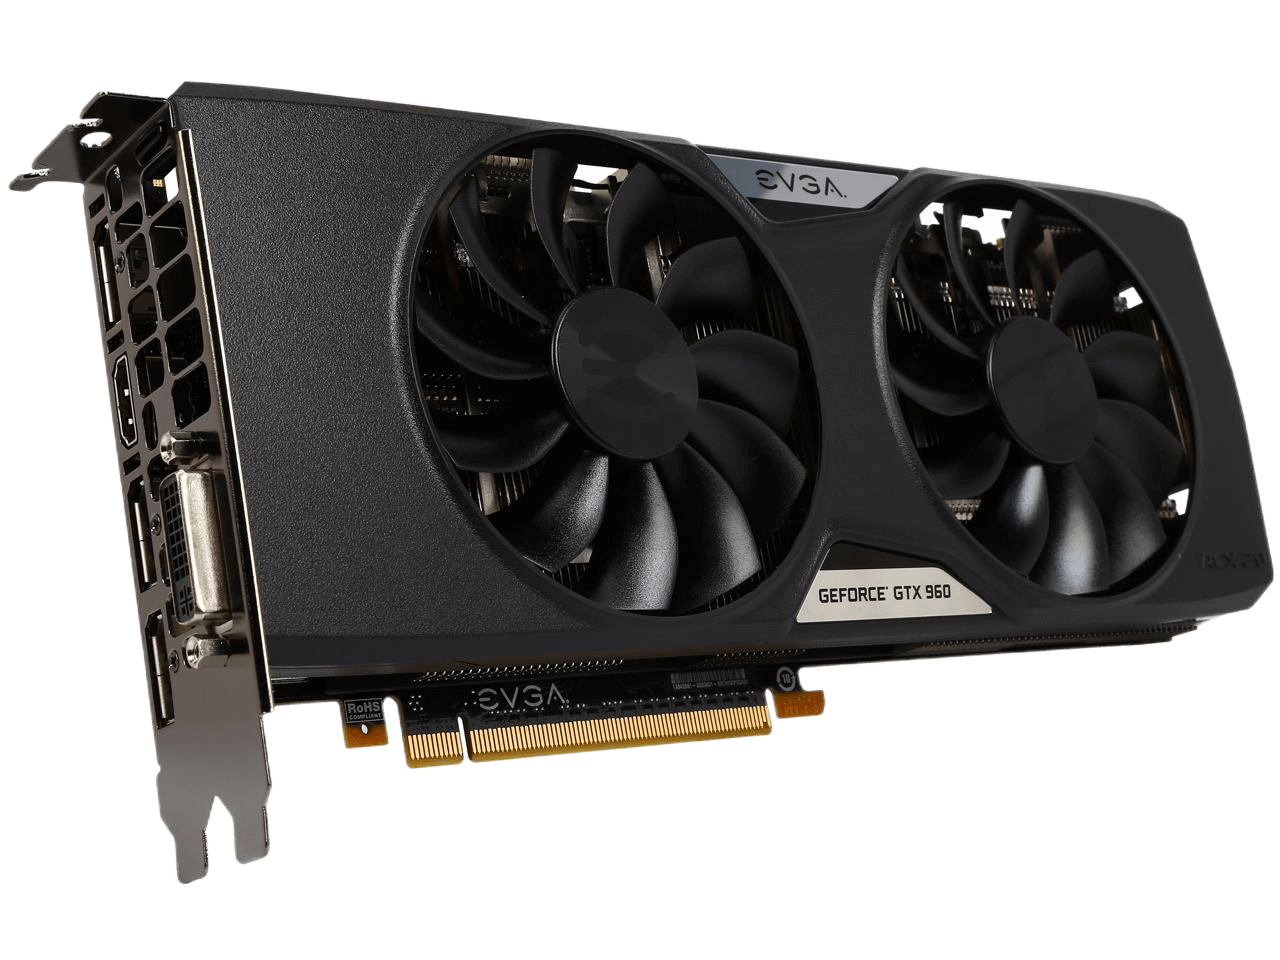 EVGA GeForce GTX 960 4GB SSC GAMING w/ACX 2.0+, Whisper Silent Cooling w/ Free Installed Backplate Graphics Card 04G-P4-3966-KR